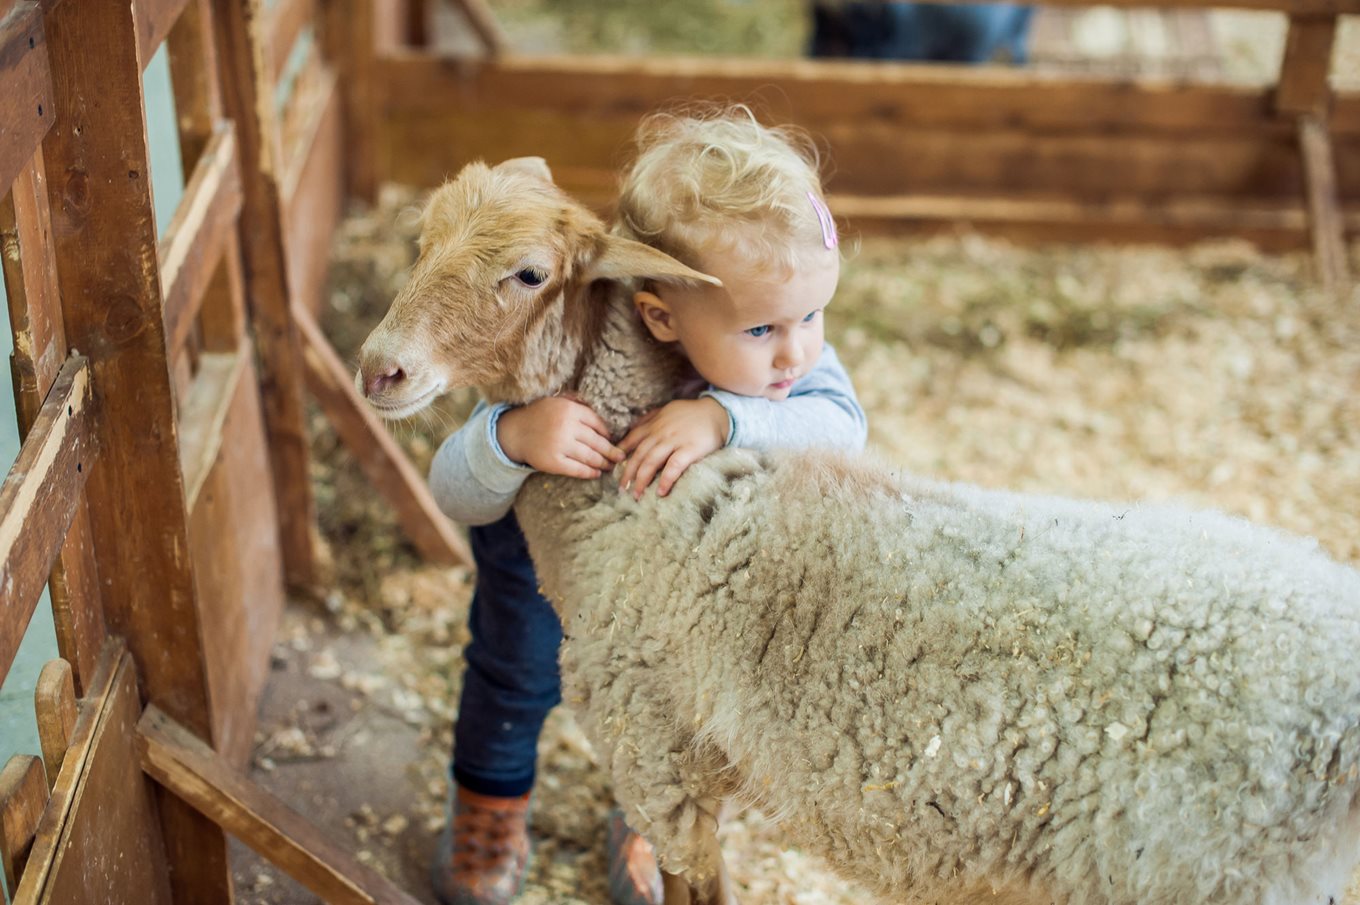 Meeting the animals - keeping children safe at a petting zoo